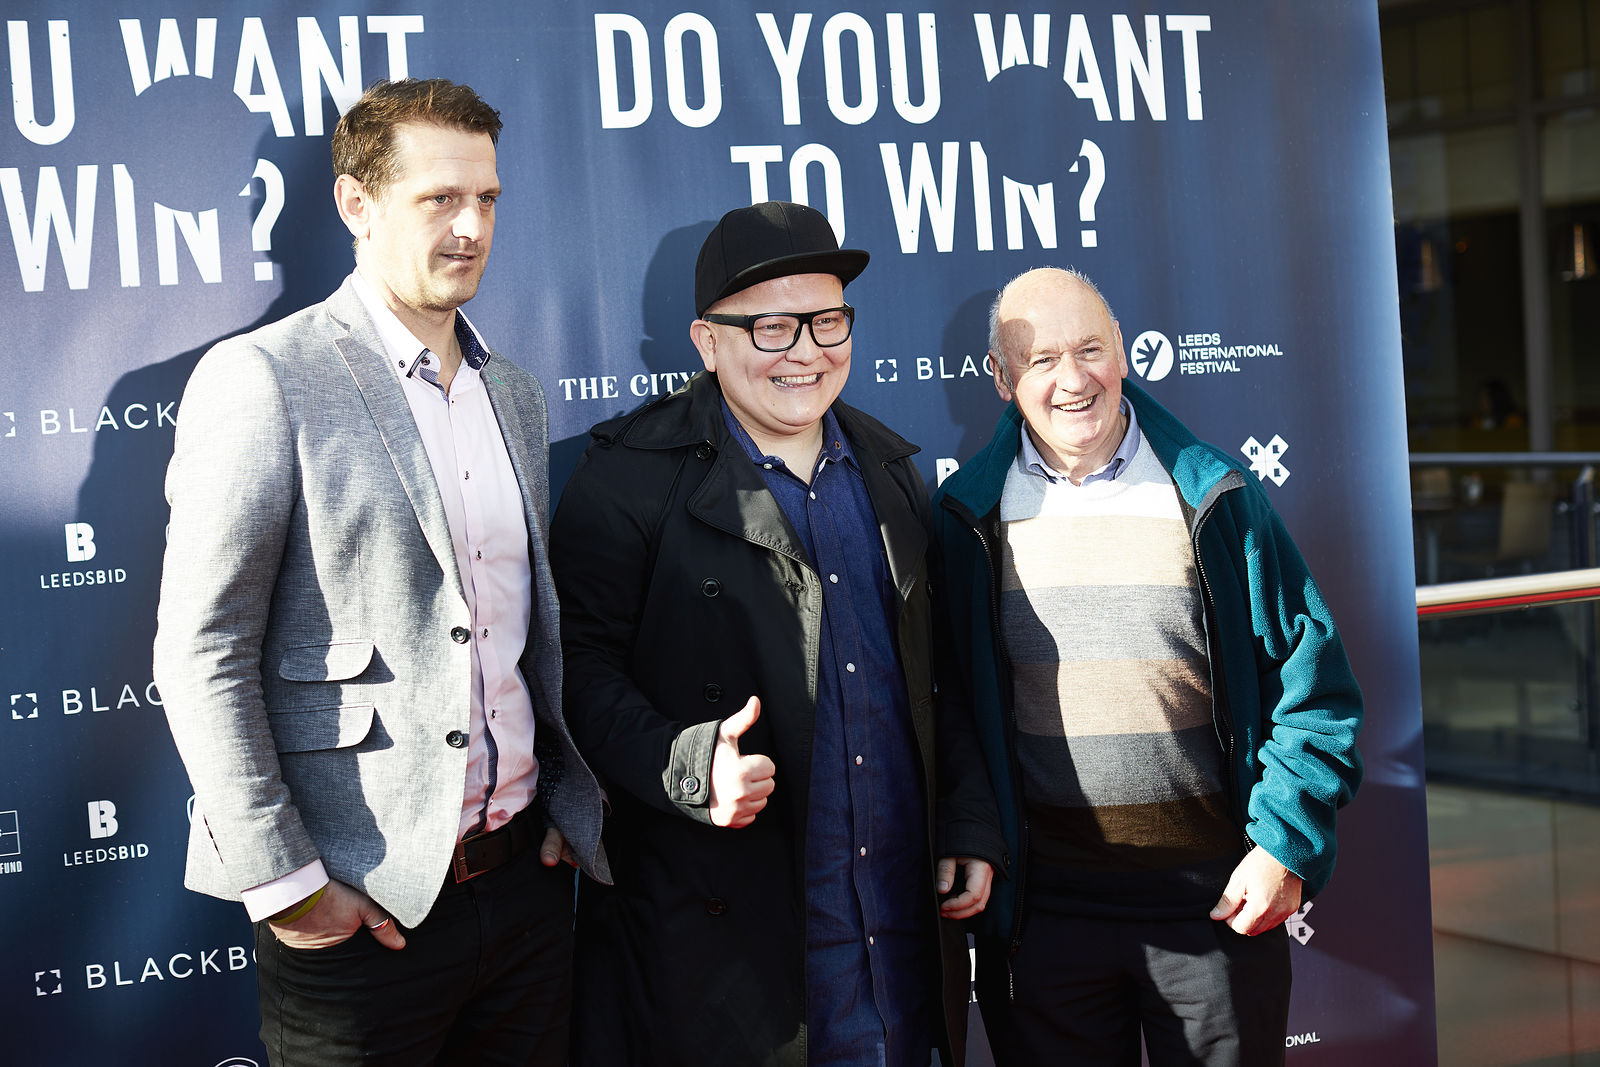 Do You Want to Win? Premiere